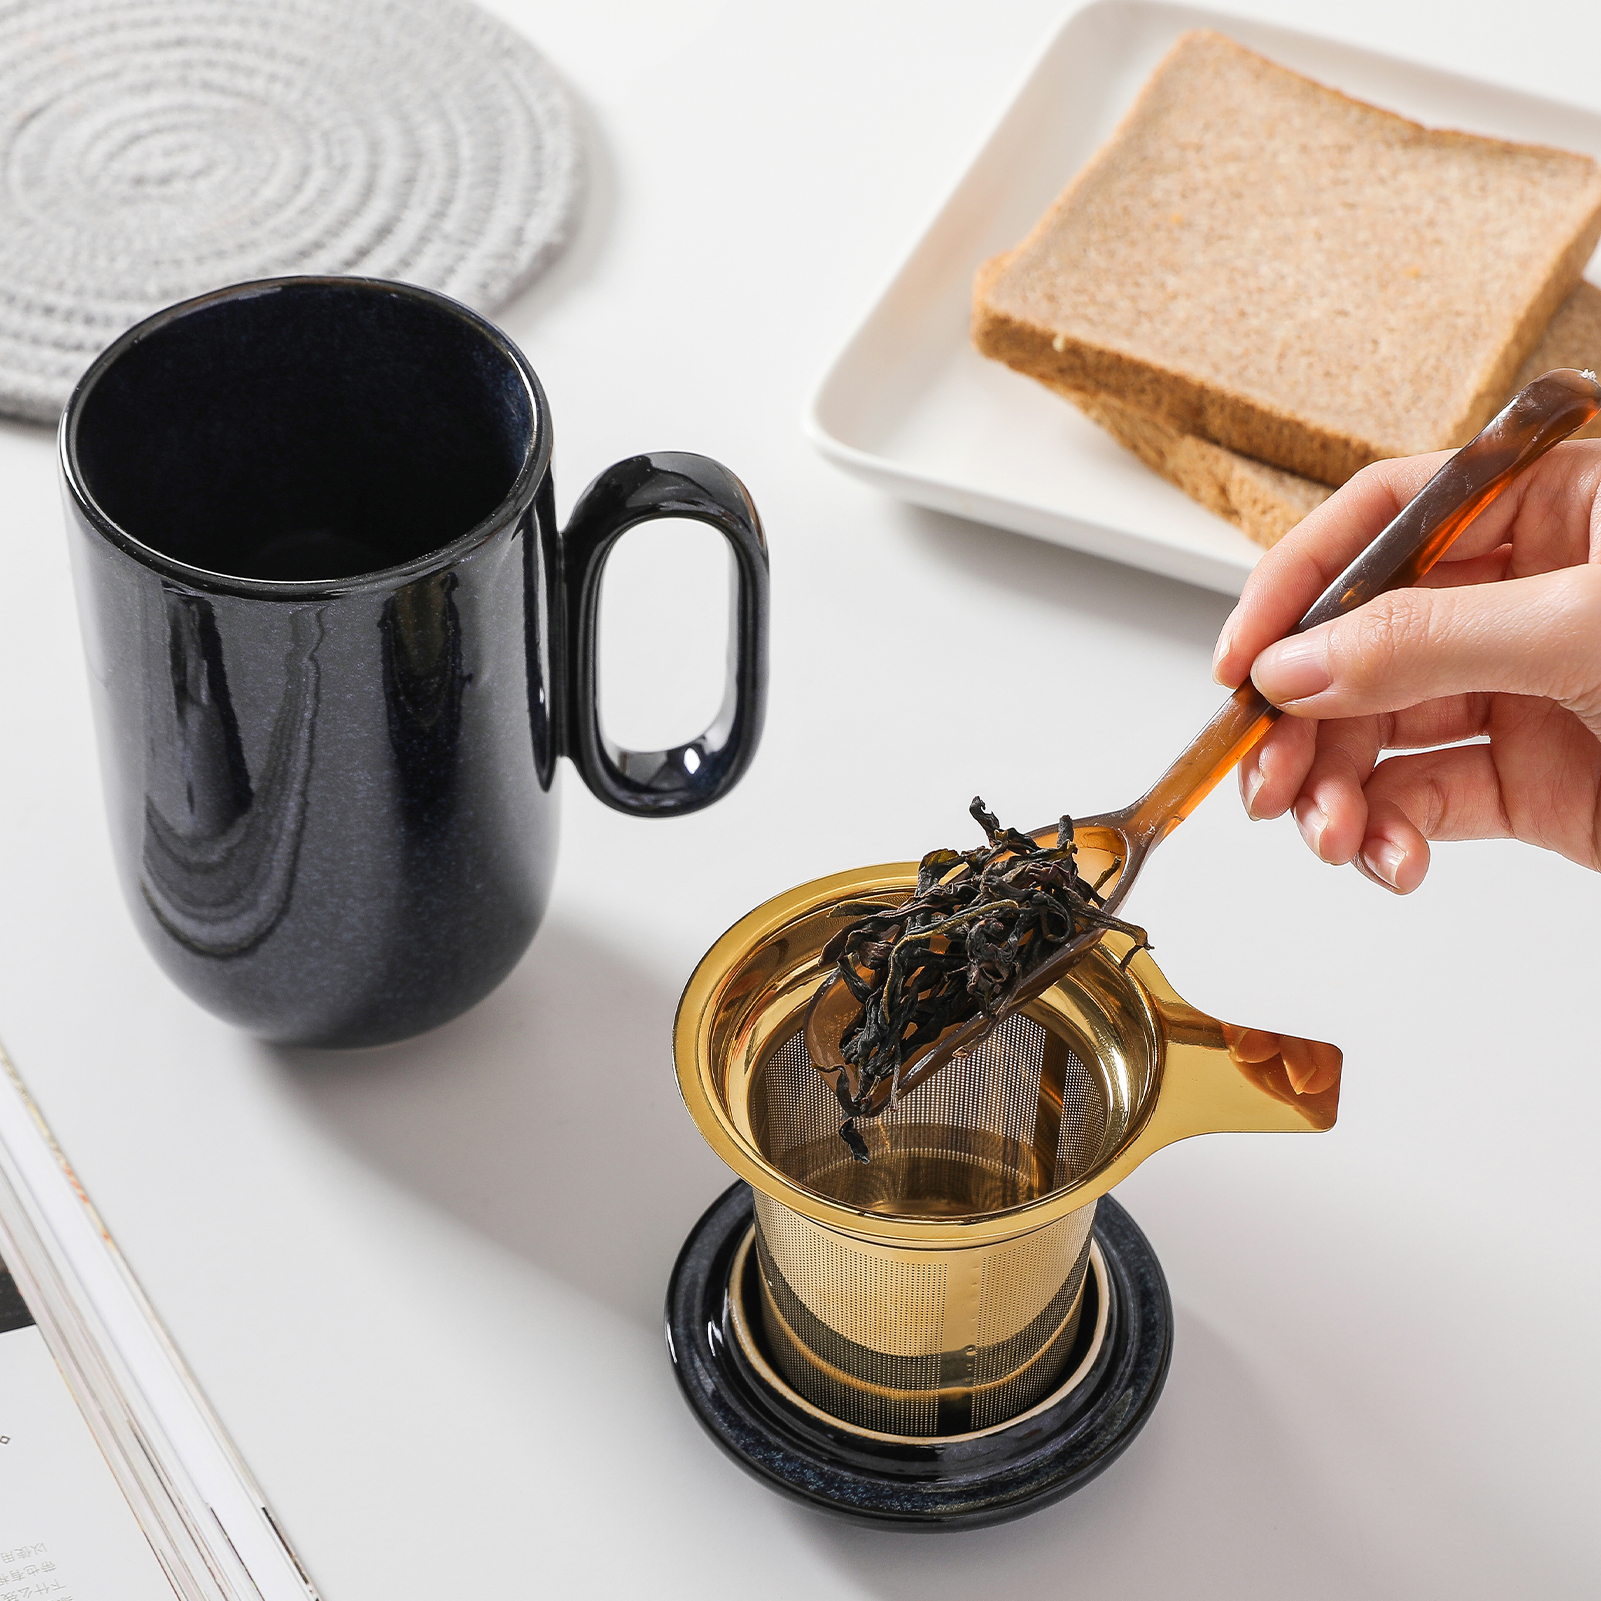 https://www.vicrays.com/wp-content/uploads/2022/07/3-ceramic-tea-mug-with-Spoon-and-Lid.jpg